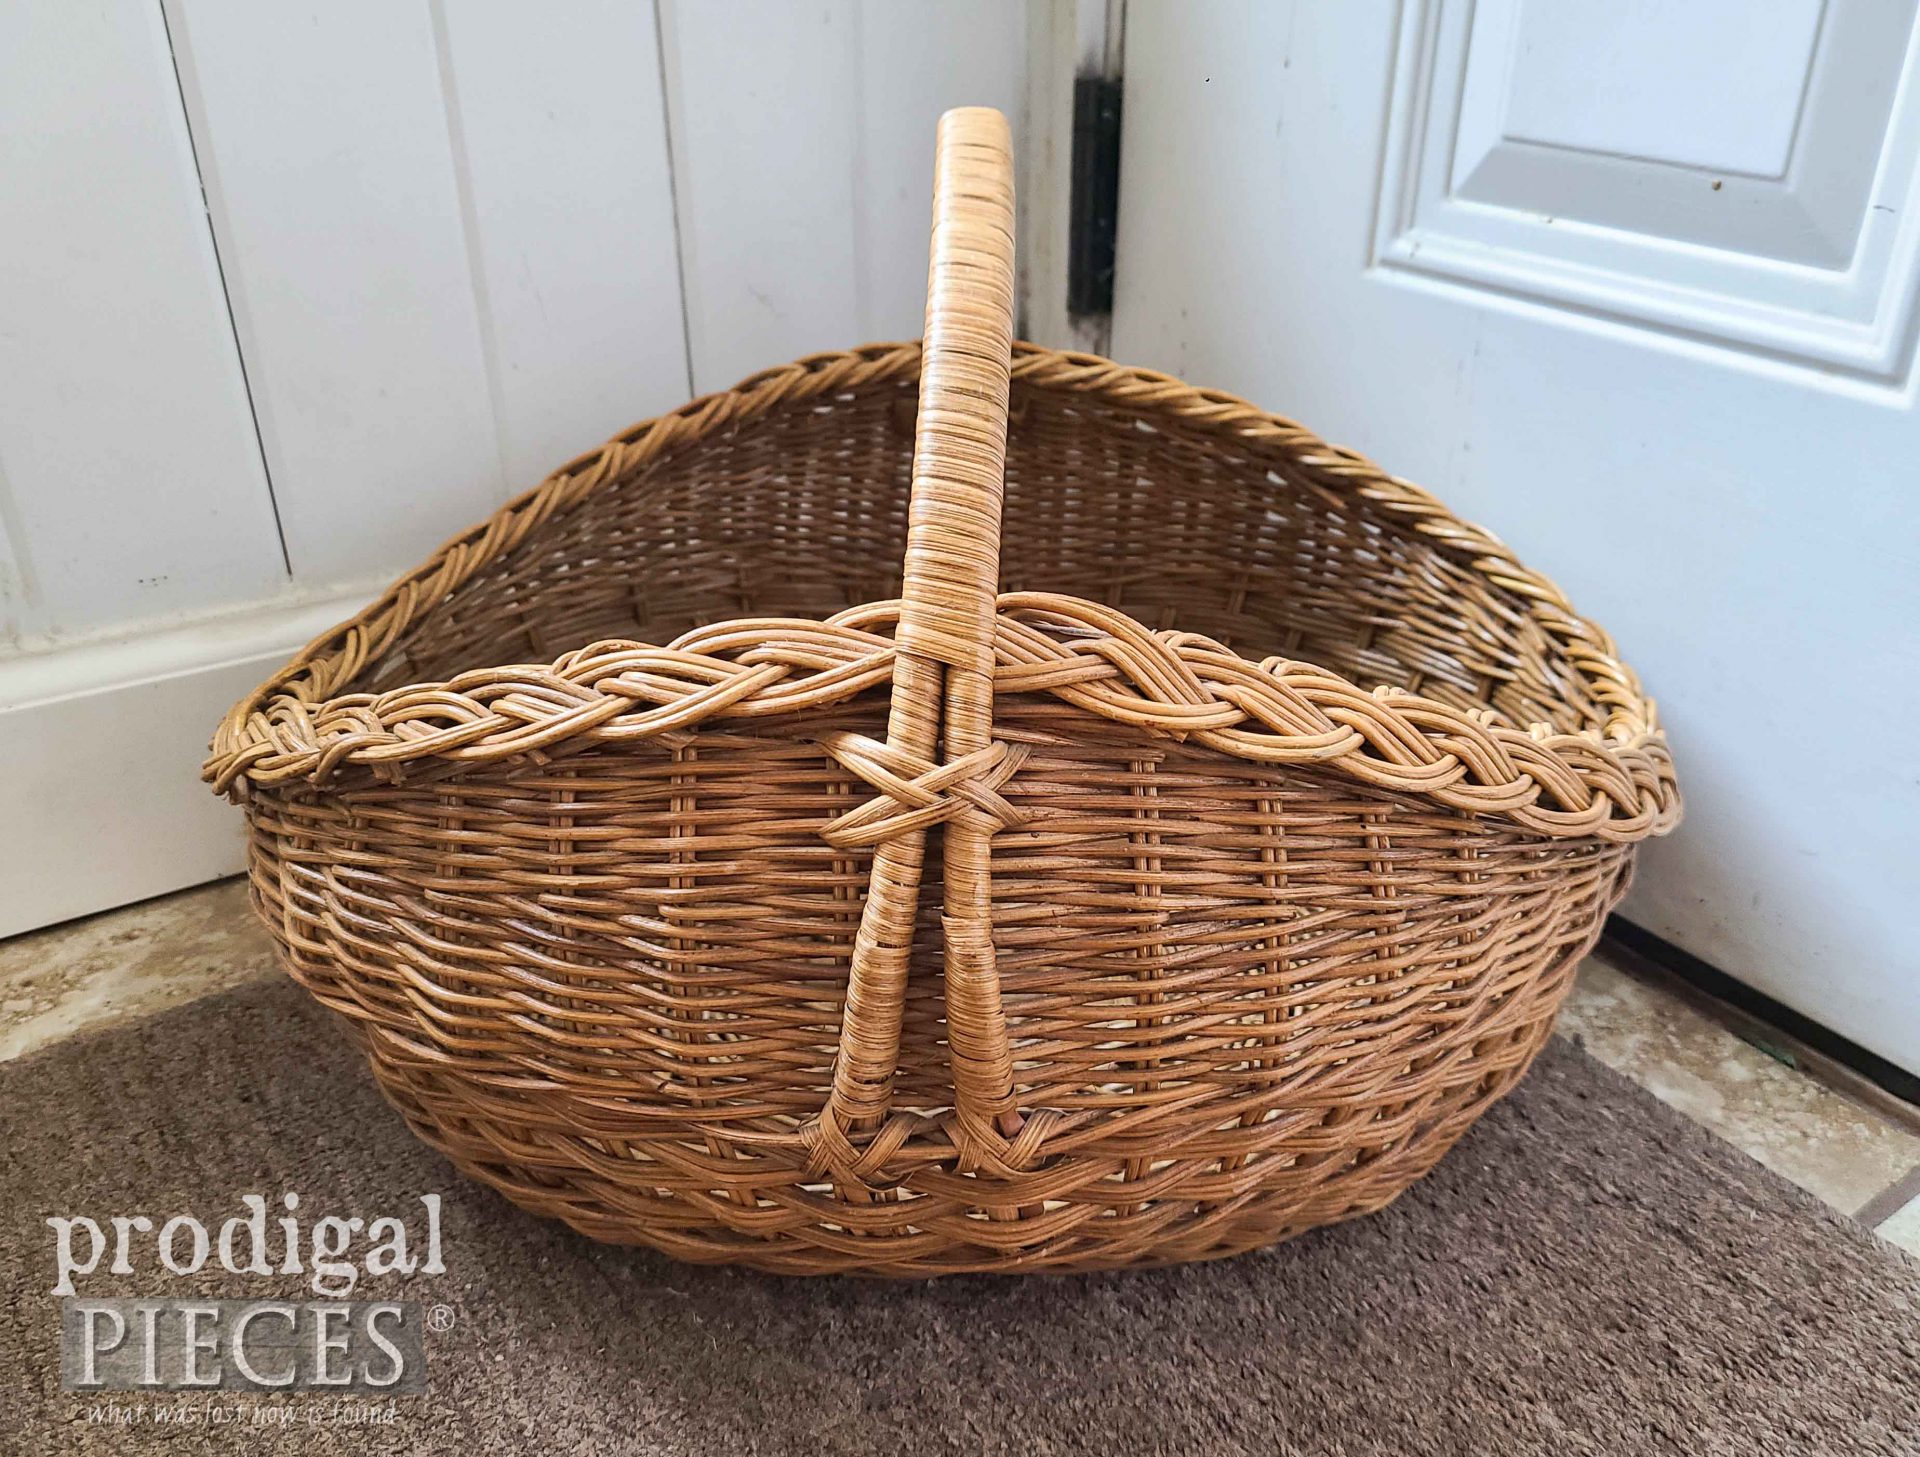 Thrifted Basket Before Makeover by Larissa of Prodigal Pieces | prodigalpieces.com #prodigalpieces